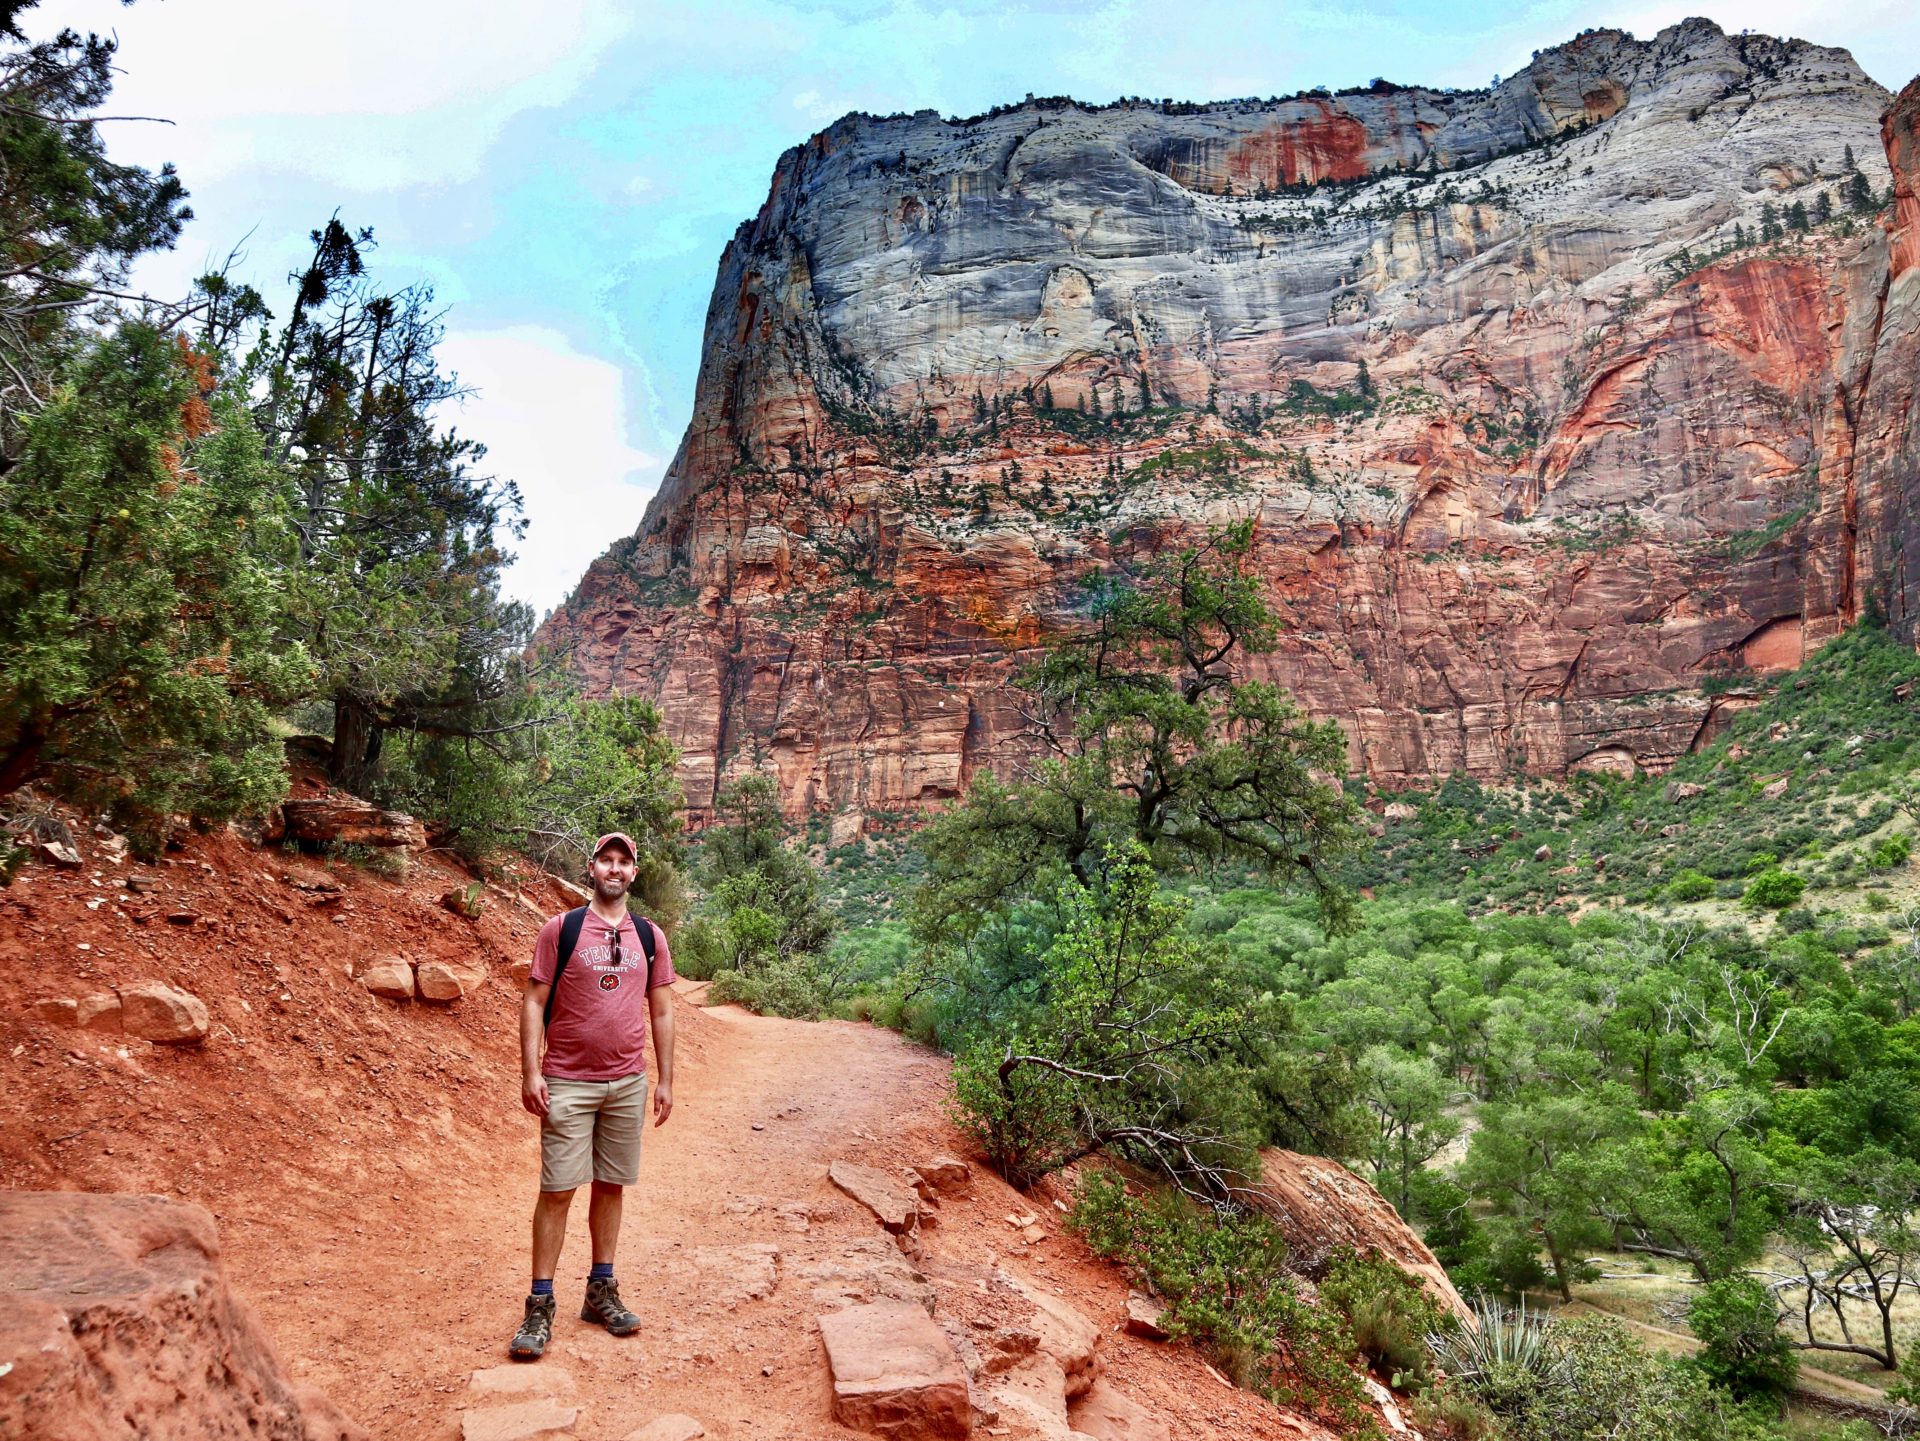 Middle Emerald Pools Trail, Zion National Park